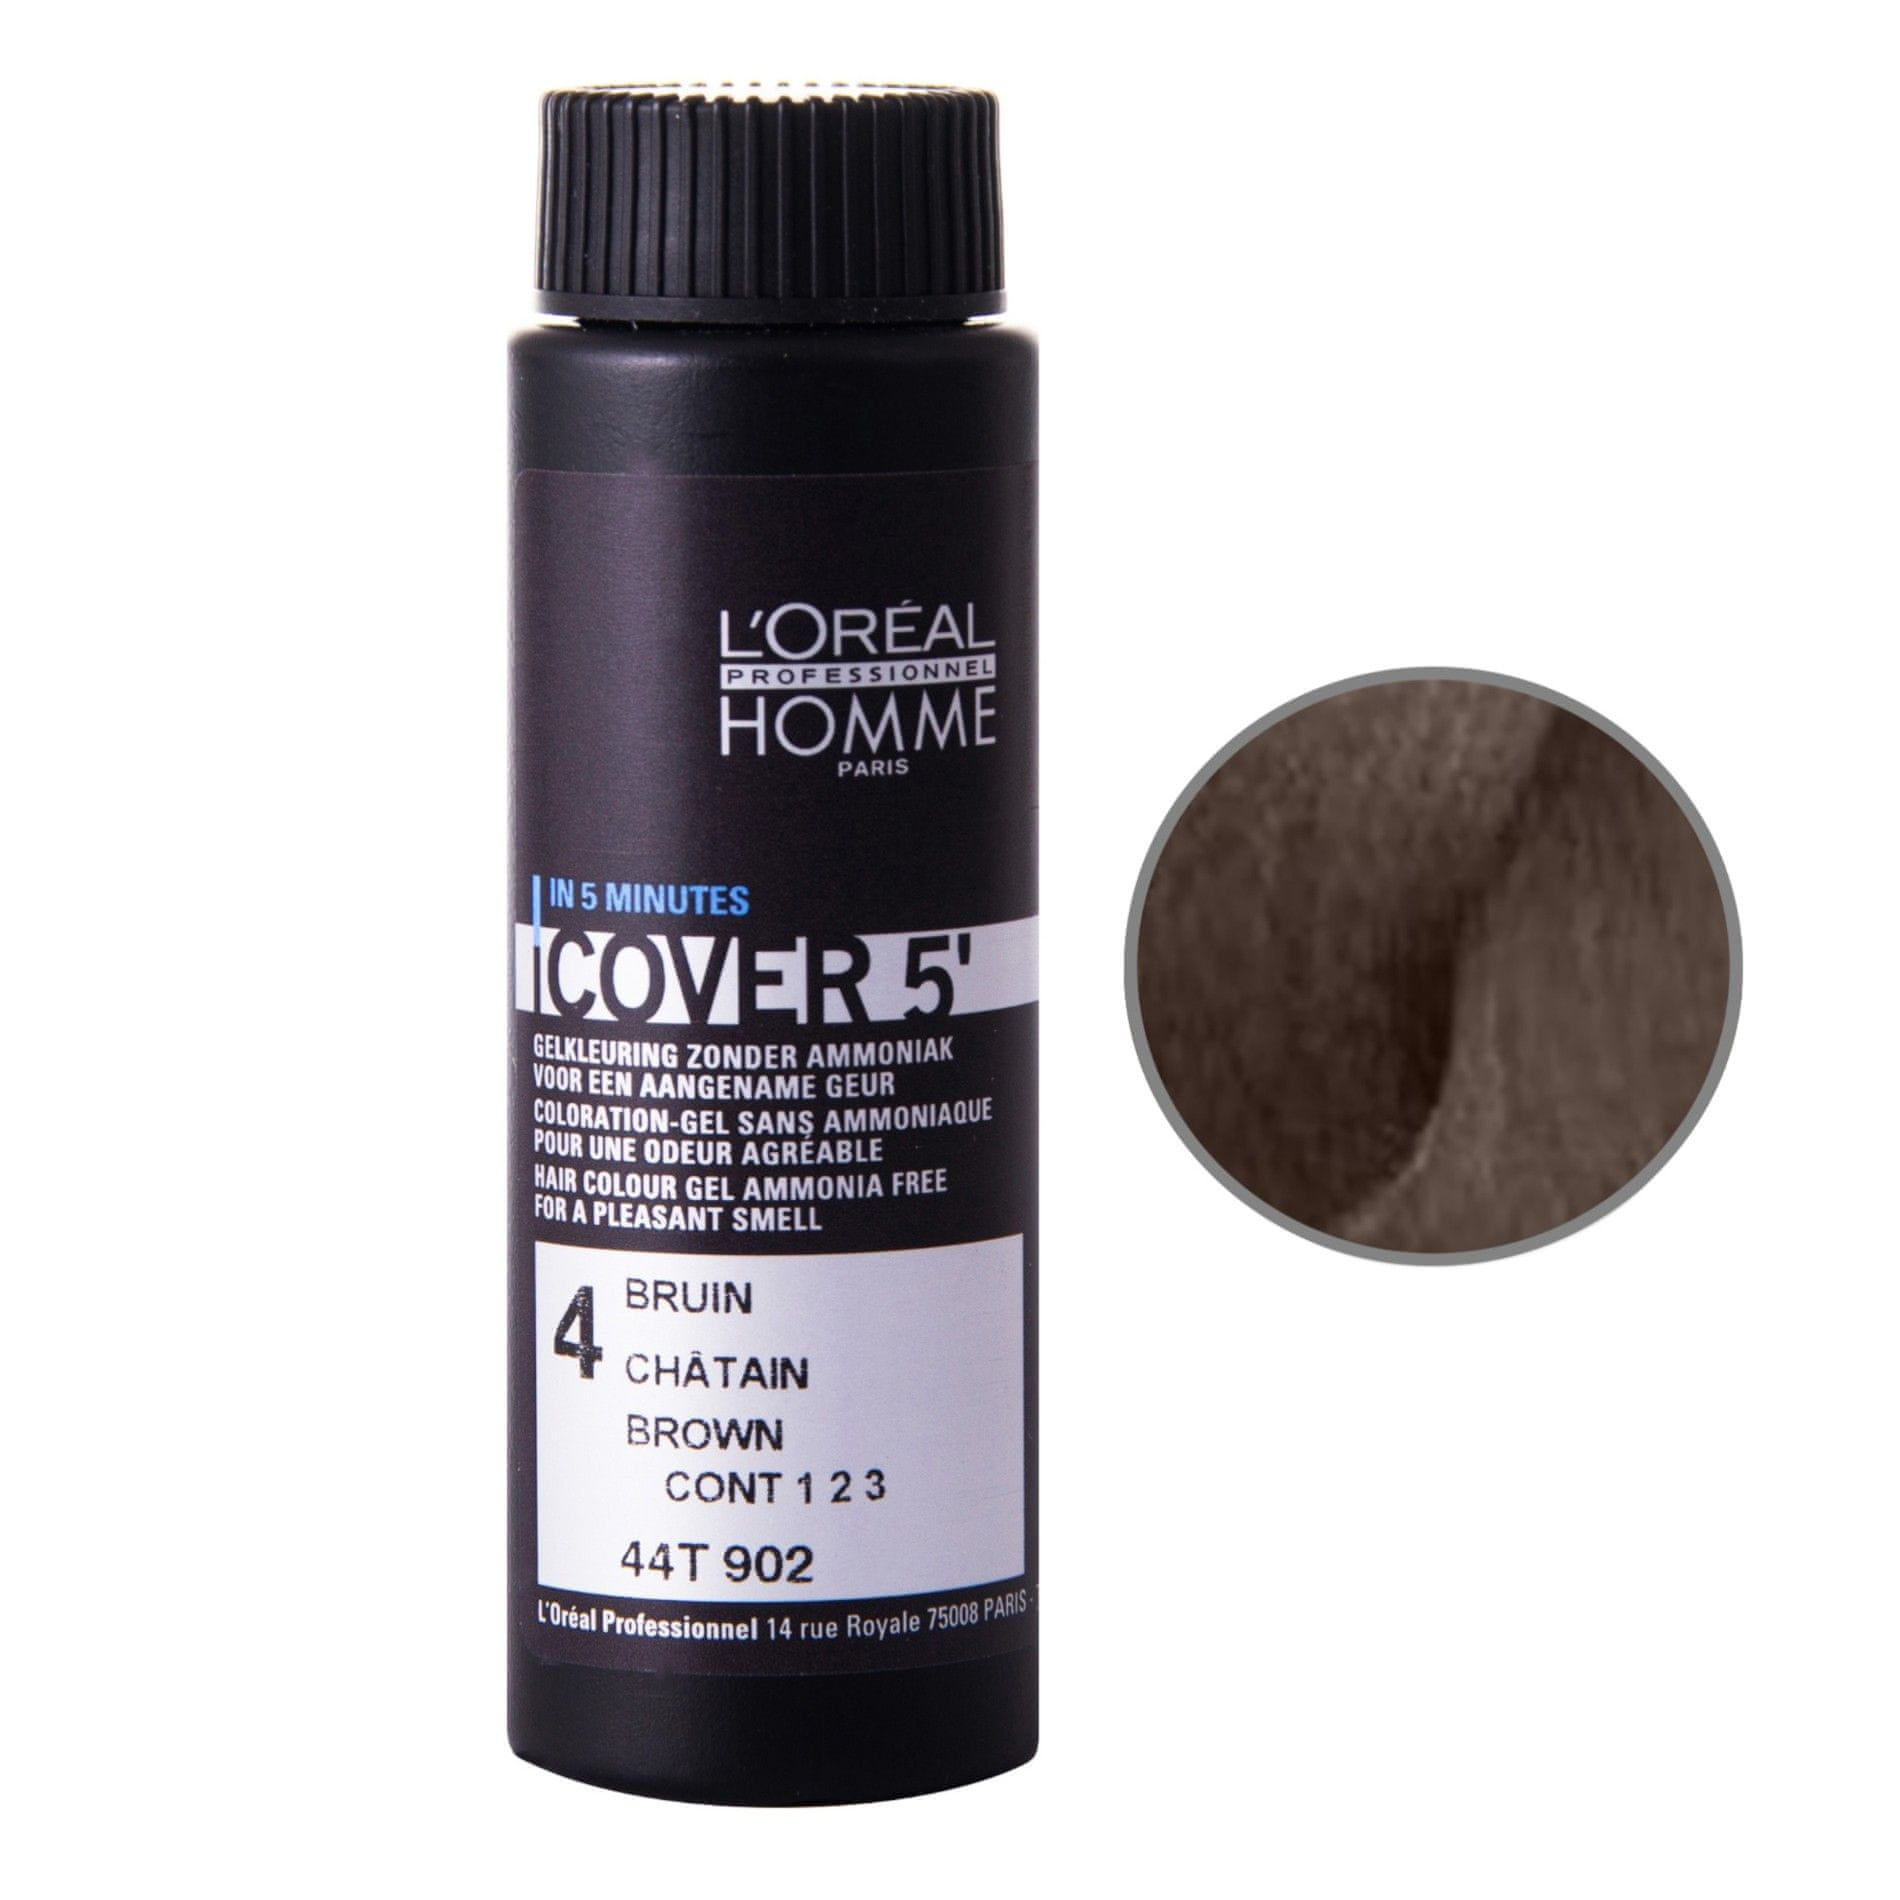 Loreal homme. L'Oreal Professionnel homme Cover 5 №5. Loreal homme Cover 5. L'Oreal Professionnel homme краска-гель Cover 5. Cover 5 Loreal homme палитра.